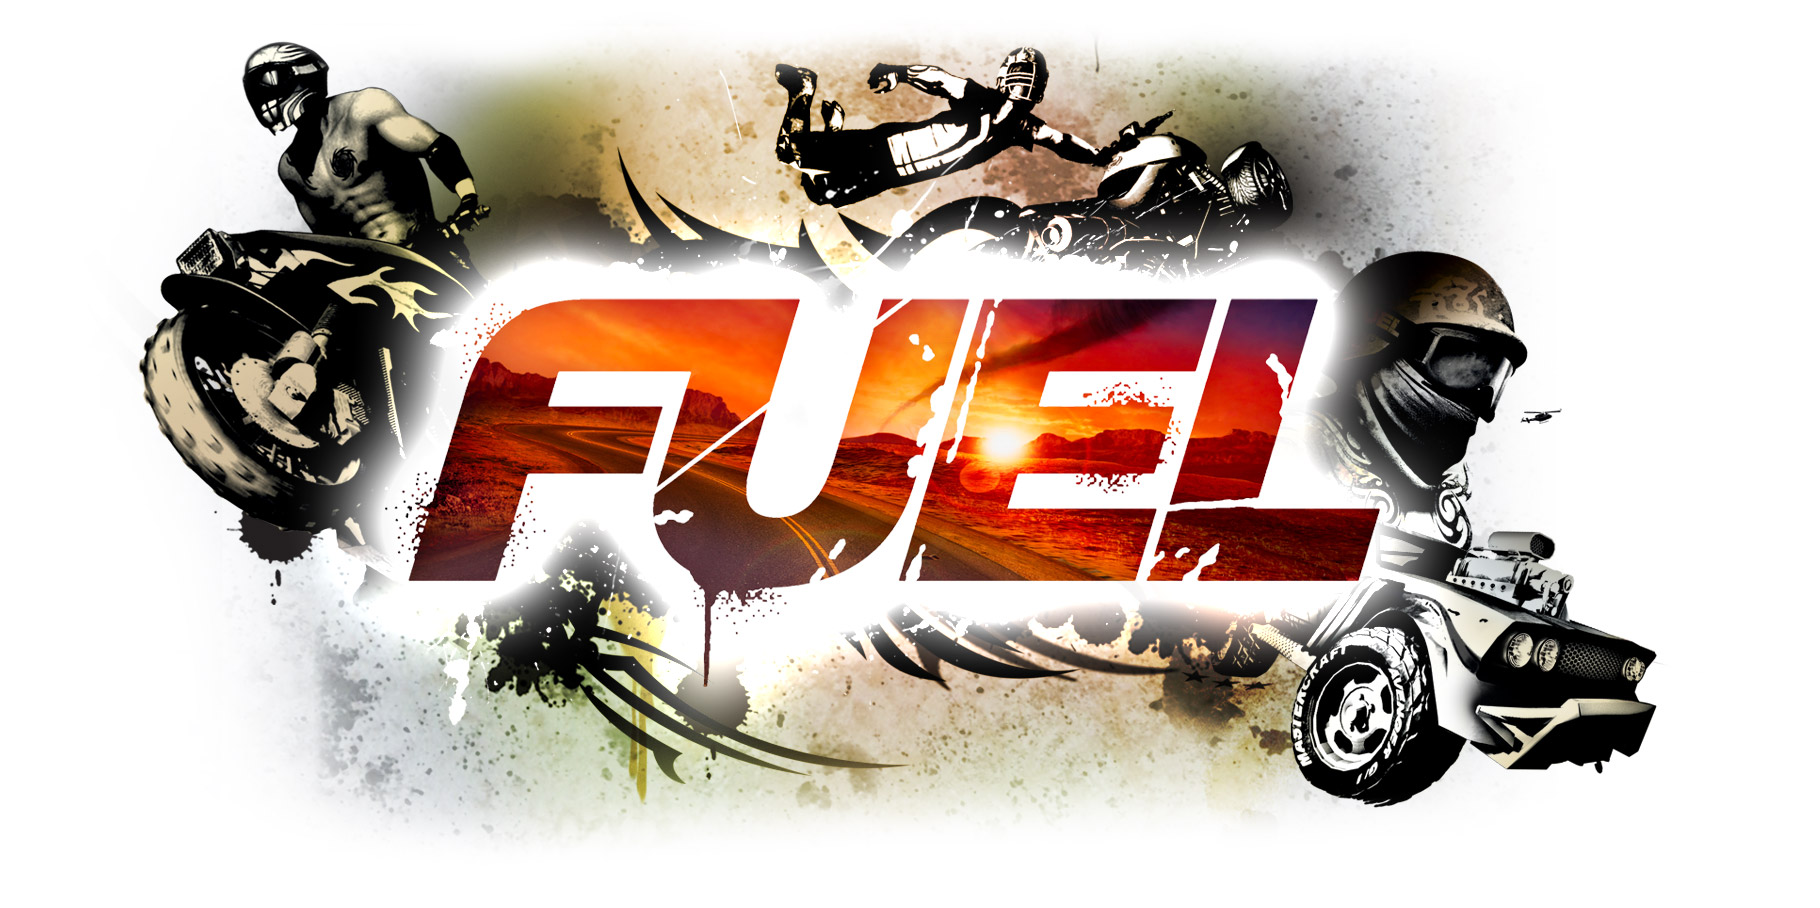 Fule free full pc game for download